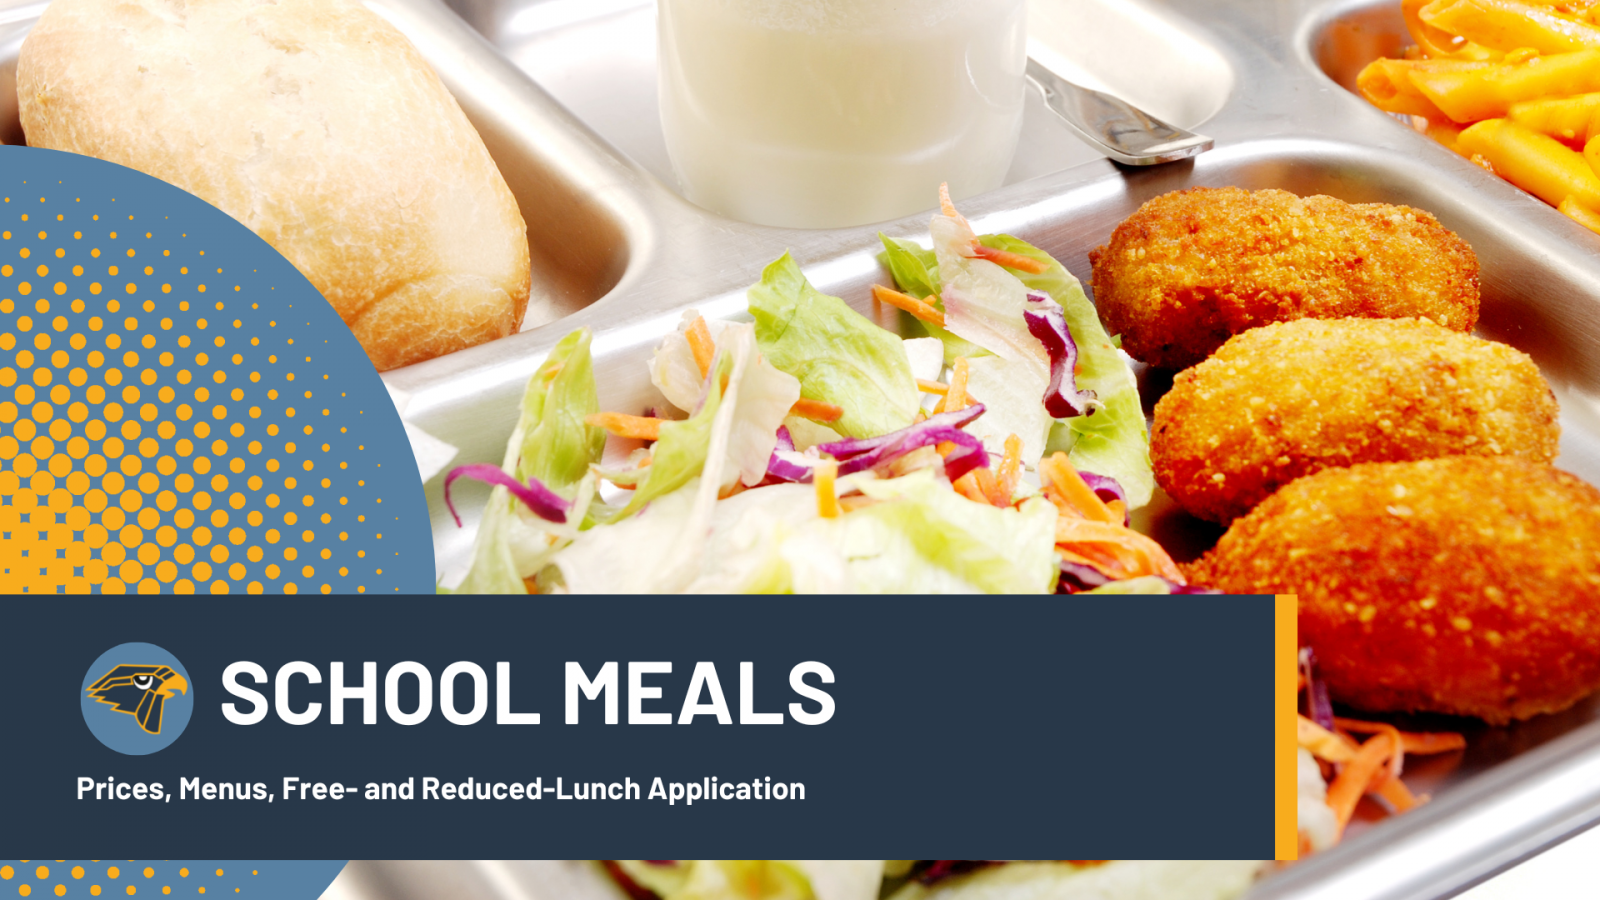 School Meals: Prices, Menus, Free- and Reduced-Lunch Application